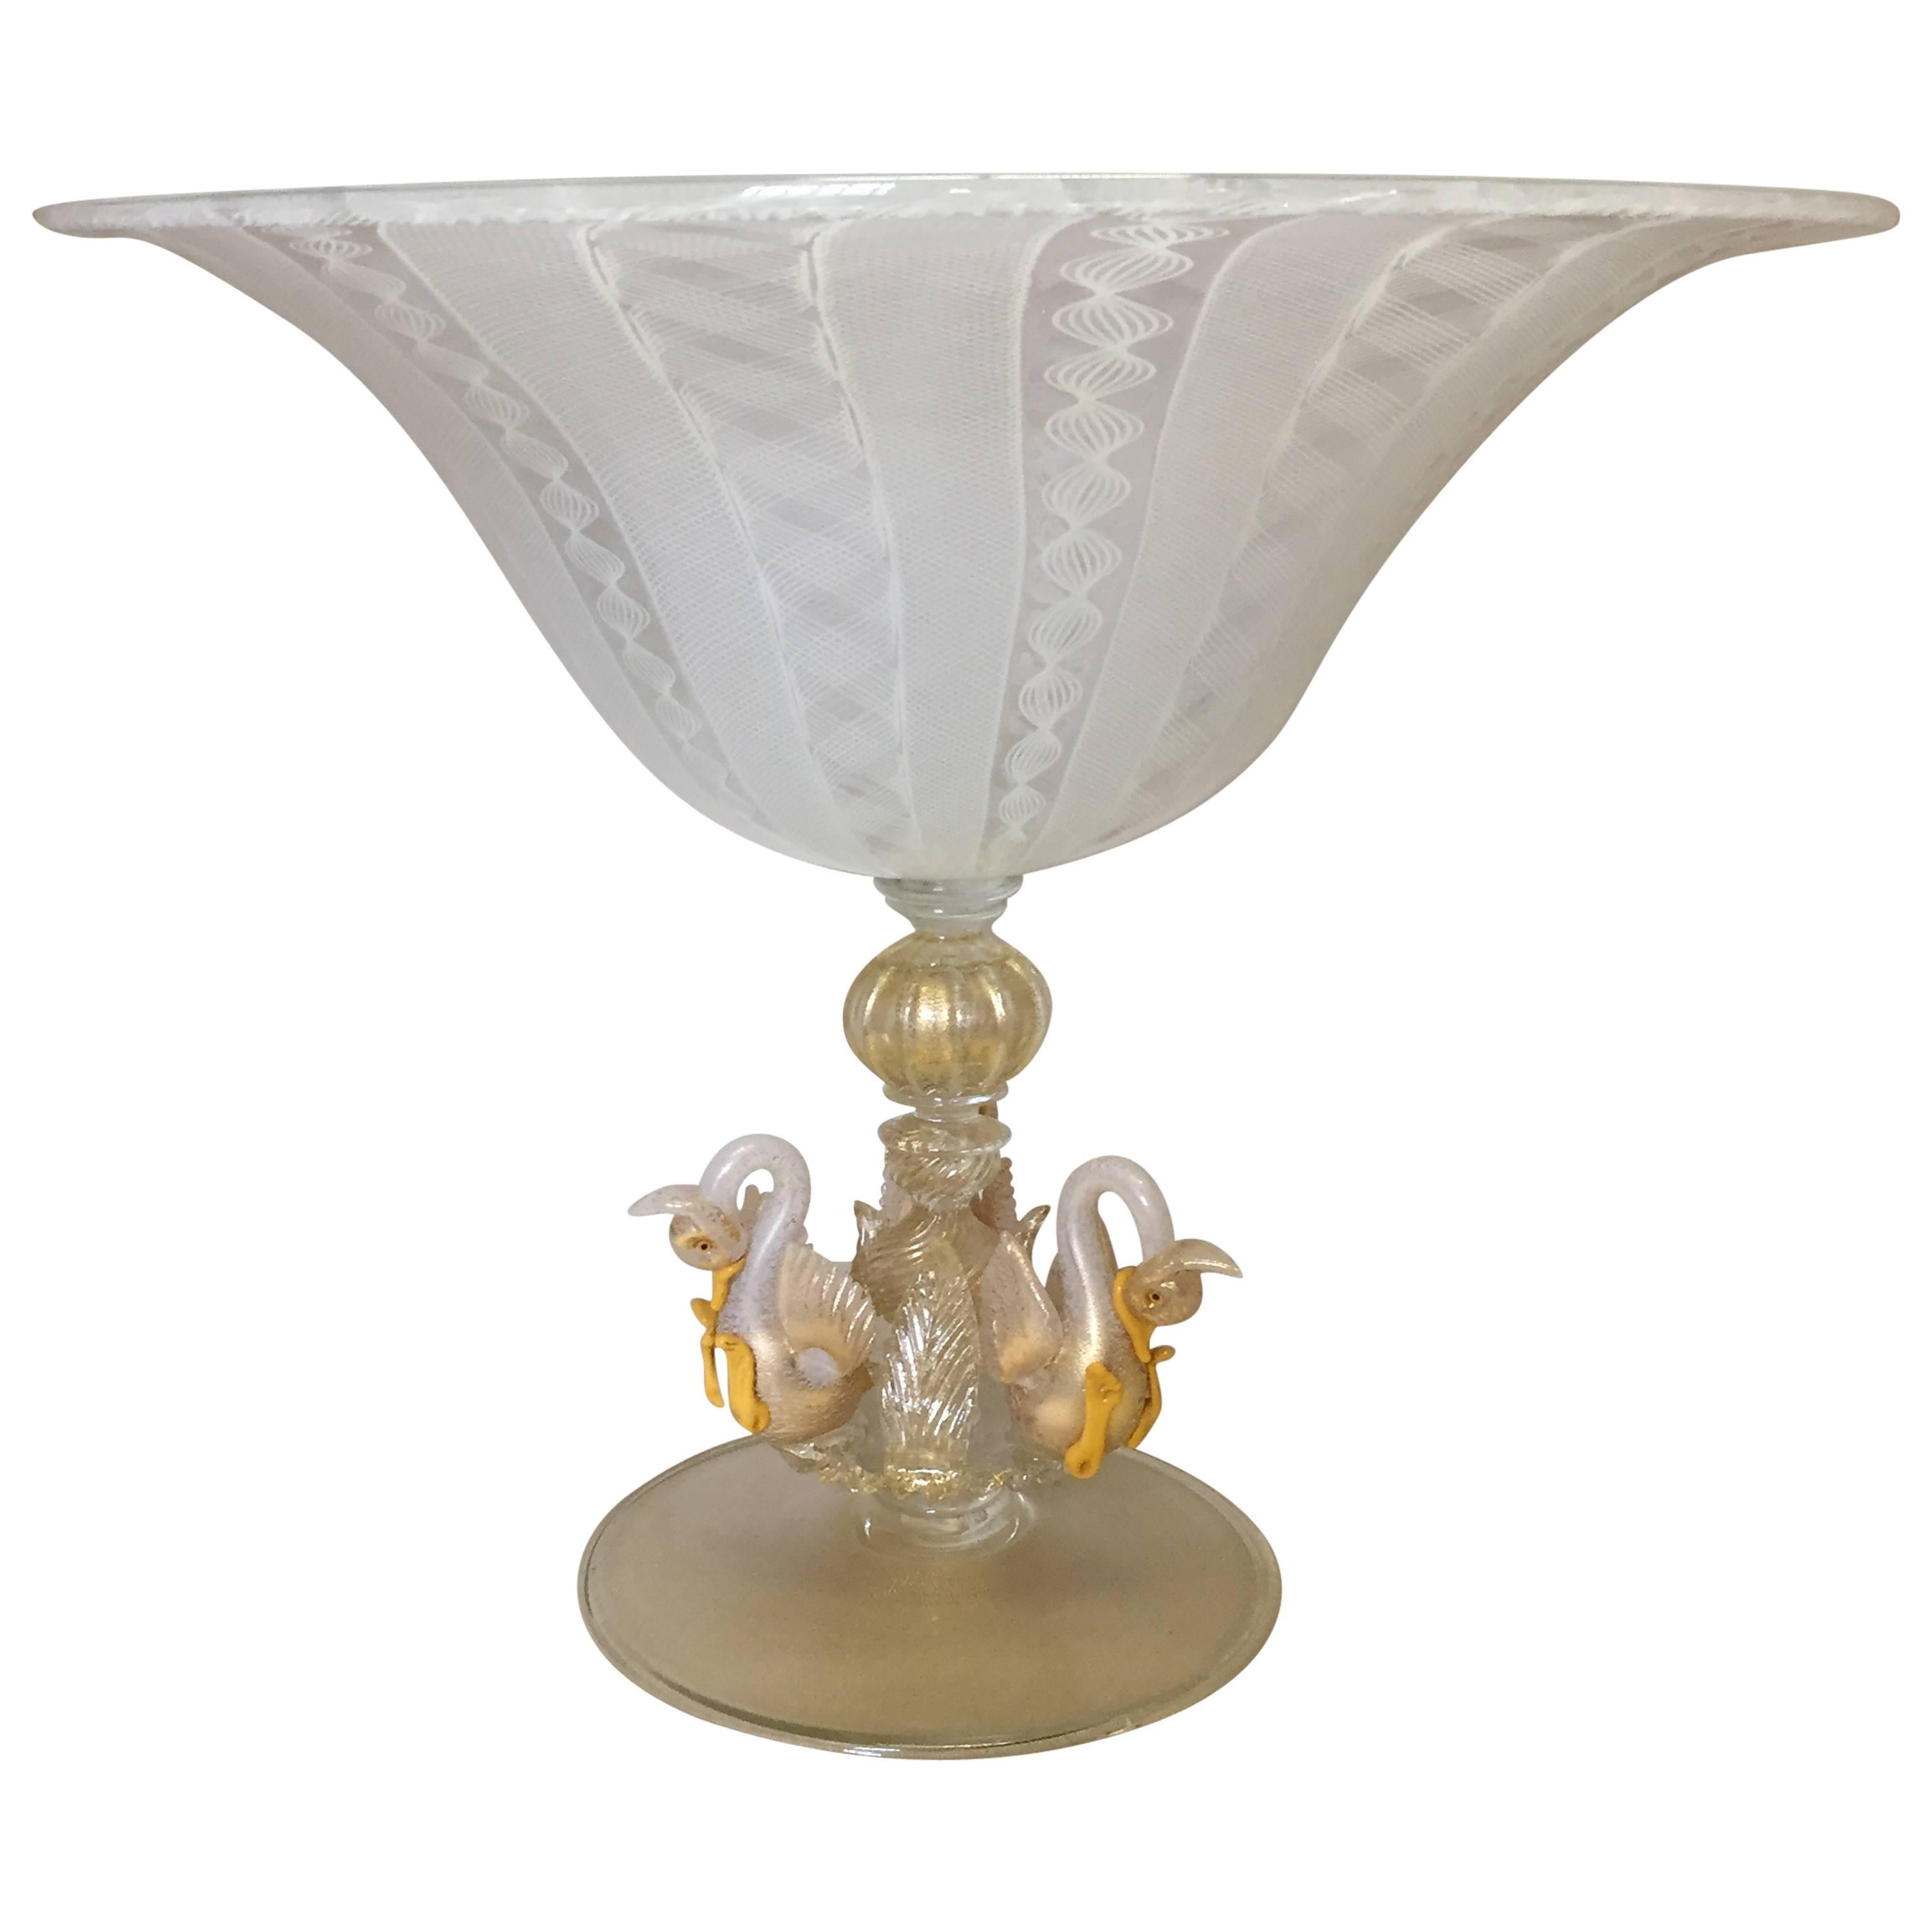 Amazing Mid-20th Century "Zanfirico" Centerpiece with Three Swans For Sale